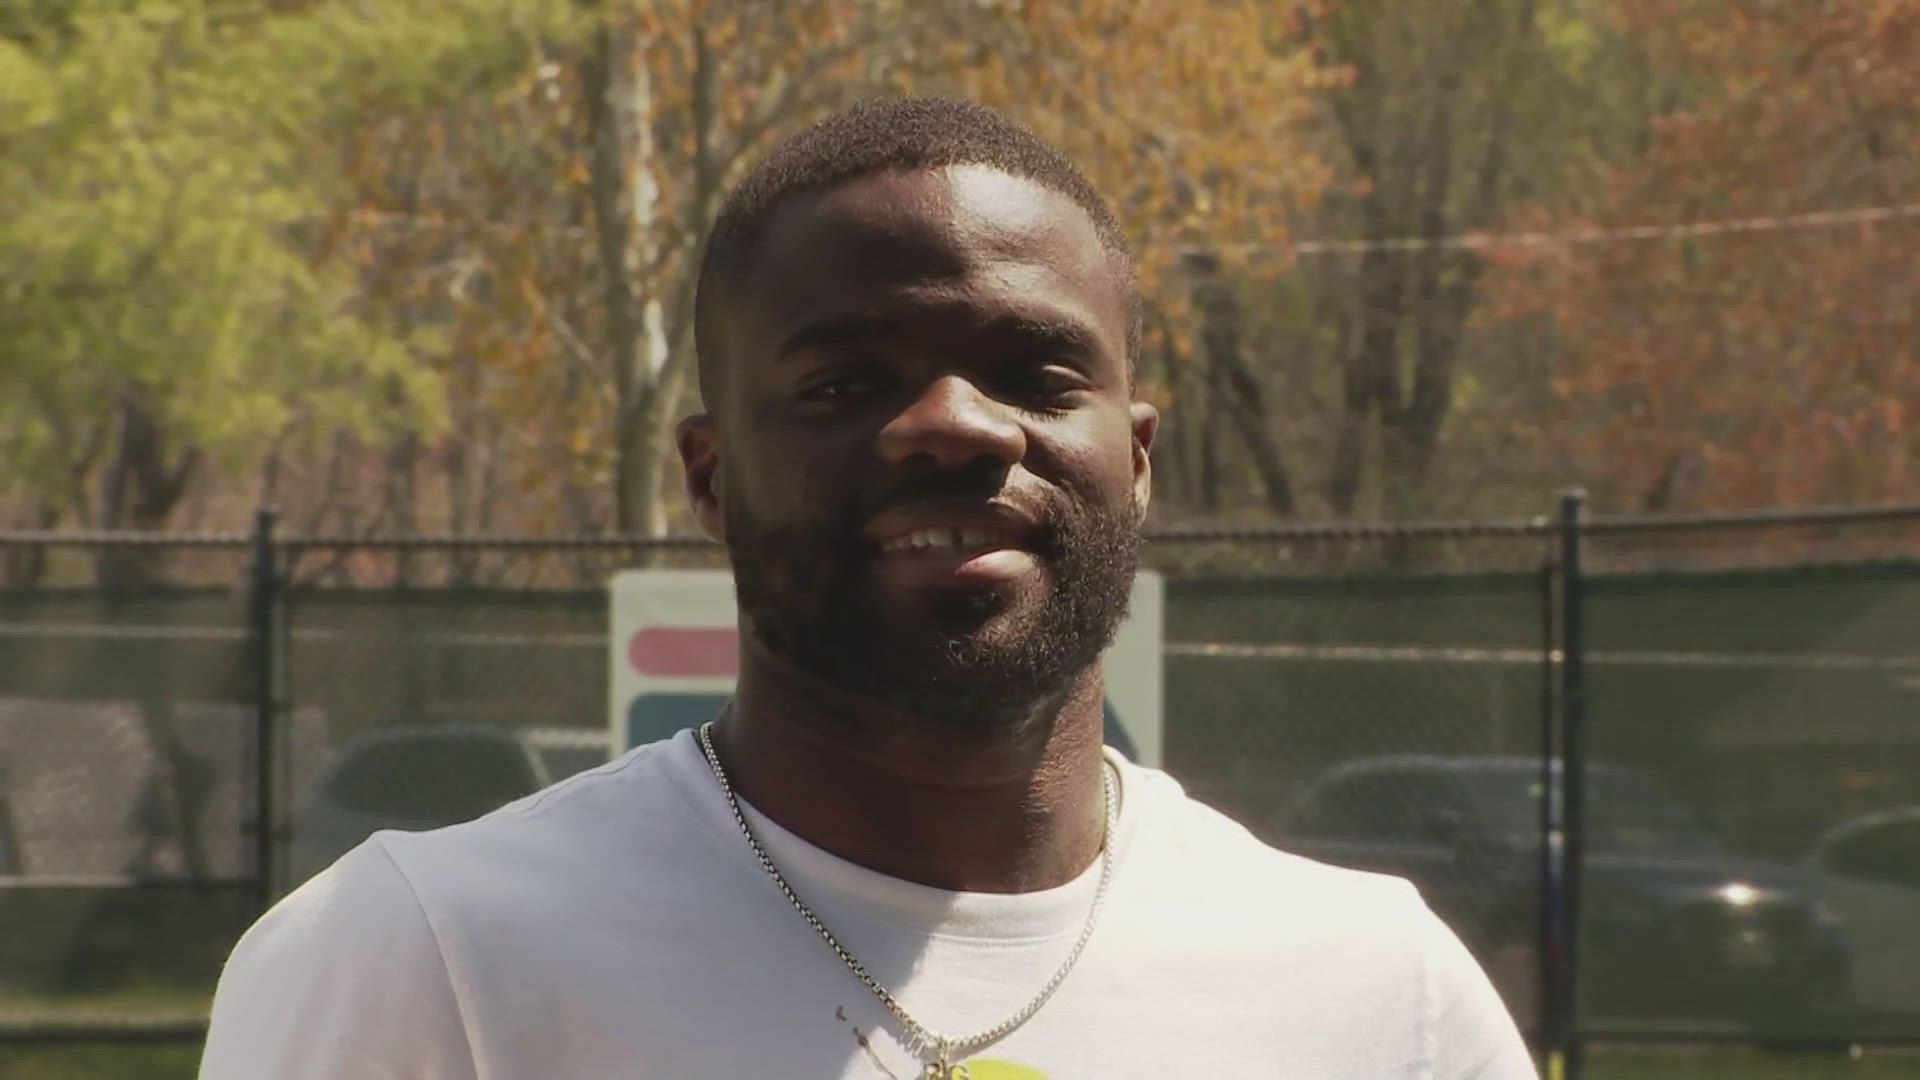 Tiafoe, ranked 10th in the world, gave $50,000 to the Junior Tennis Champion Center in College Park, Maryland